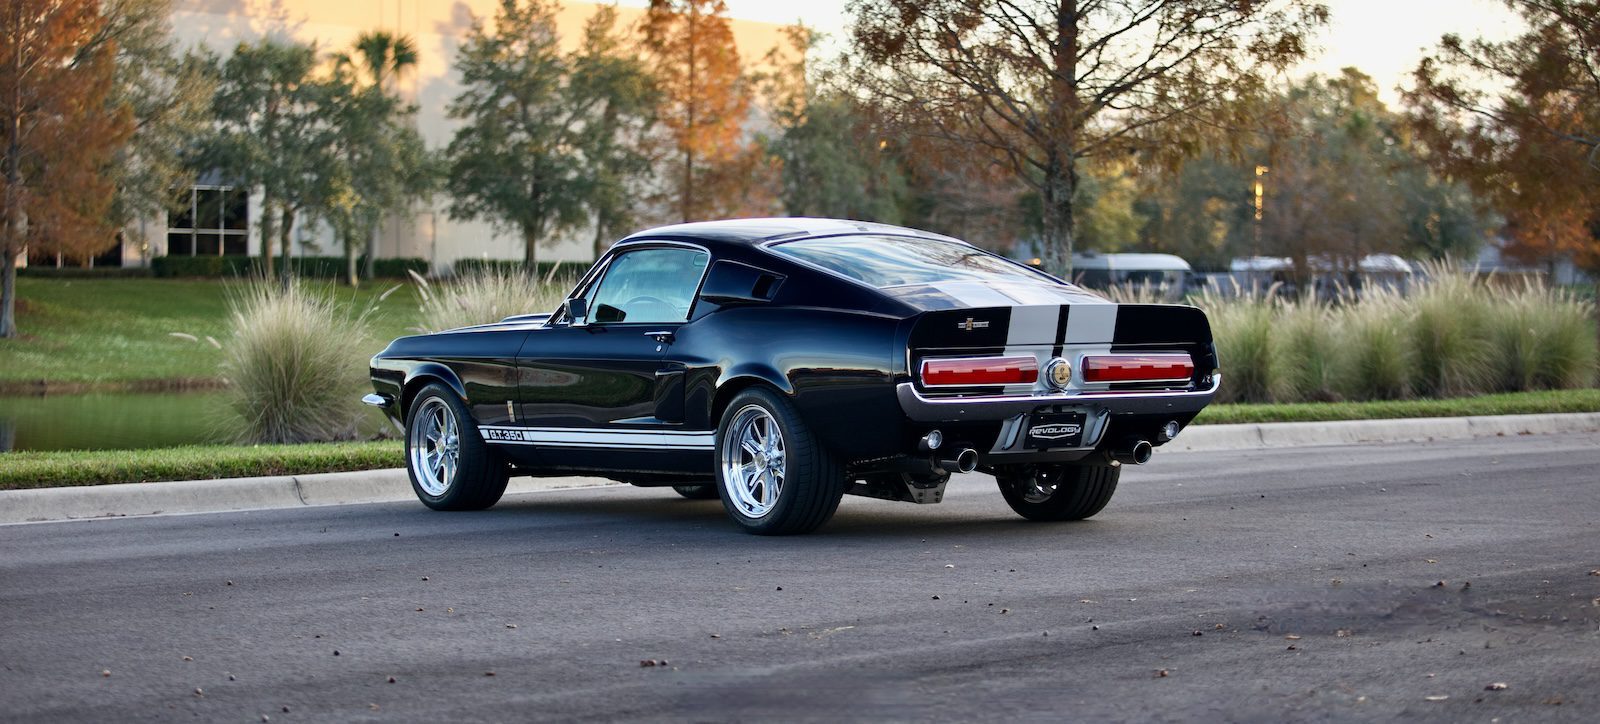 Revology Cars: Brand-New Reproduction Classic Mustang